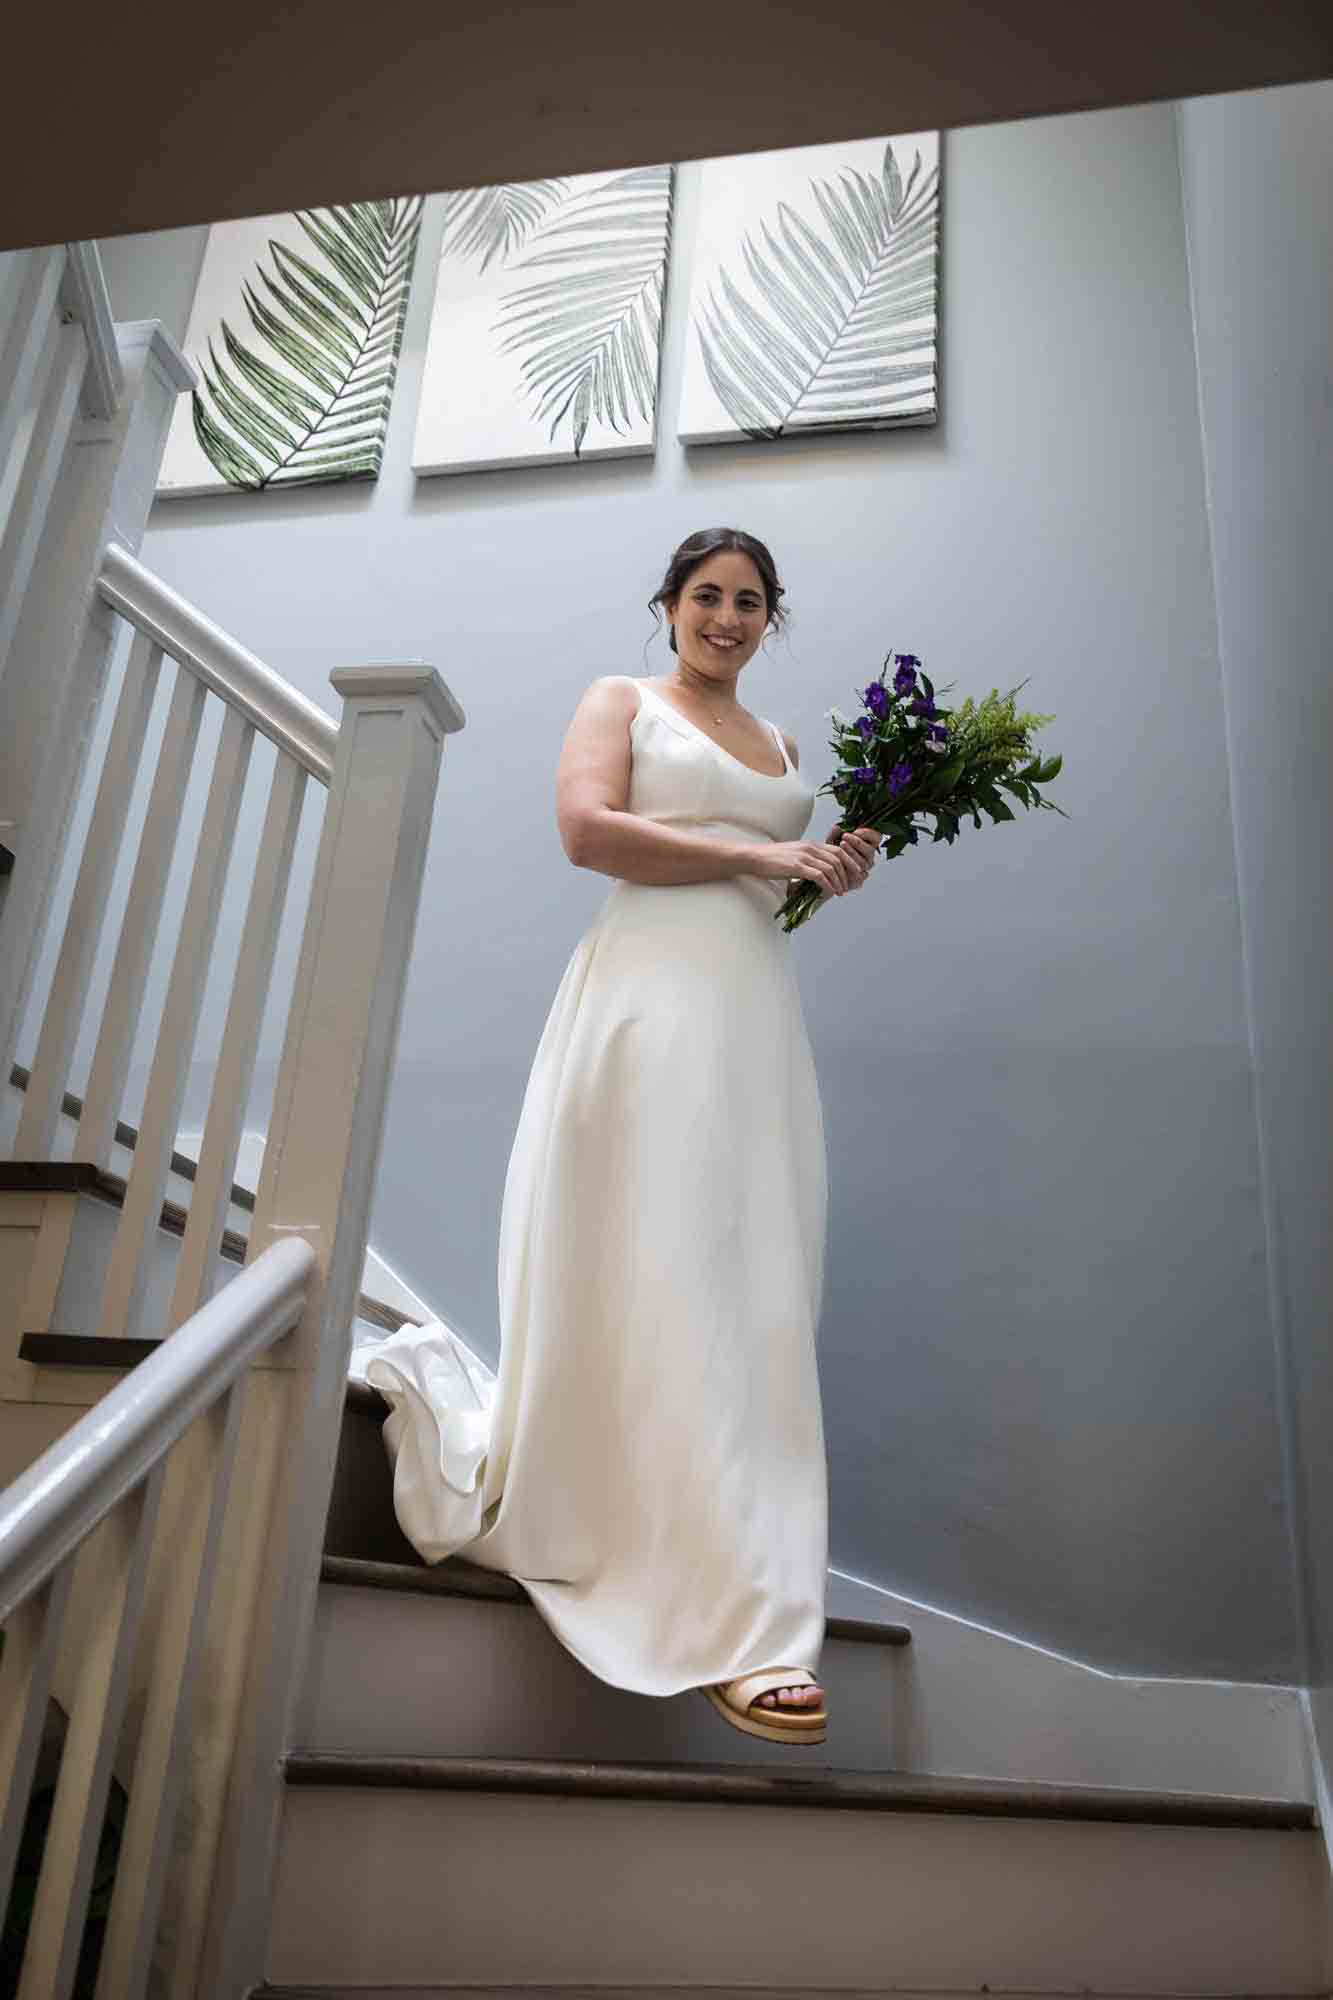 Bride wearing white sleeveless wedding dress holding bouquet of flowers walking down stairs at a Sanctuary Roosevelt Island wedding